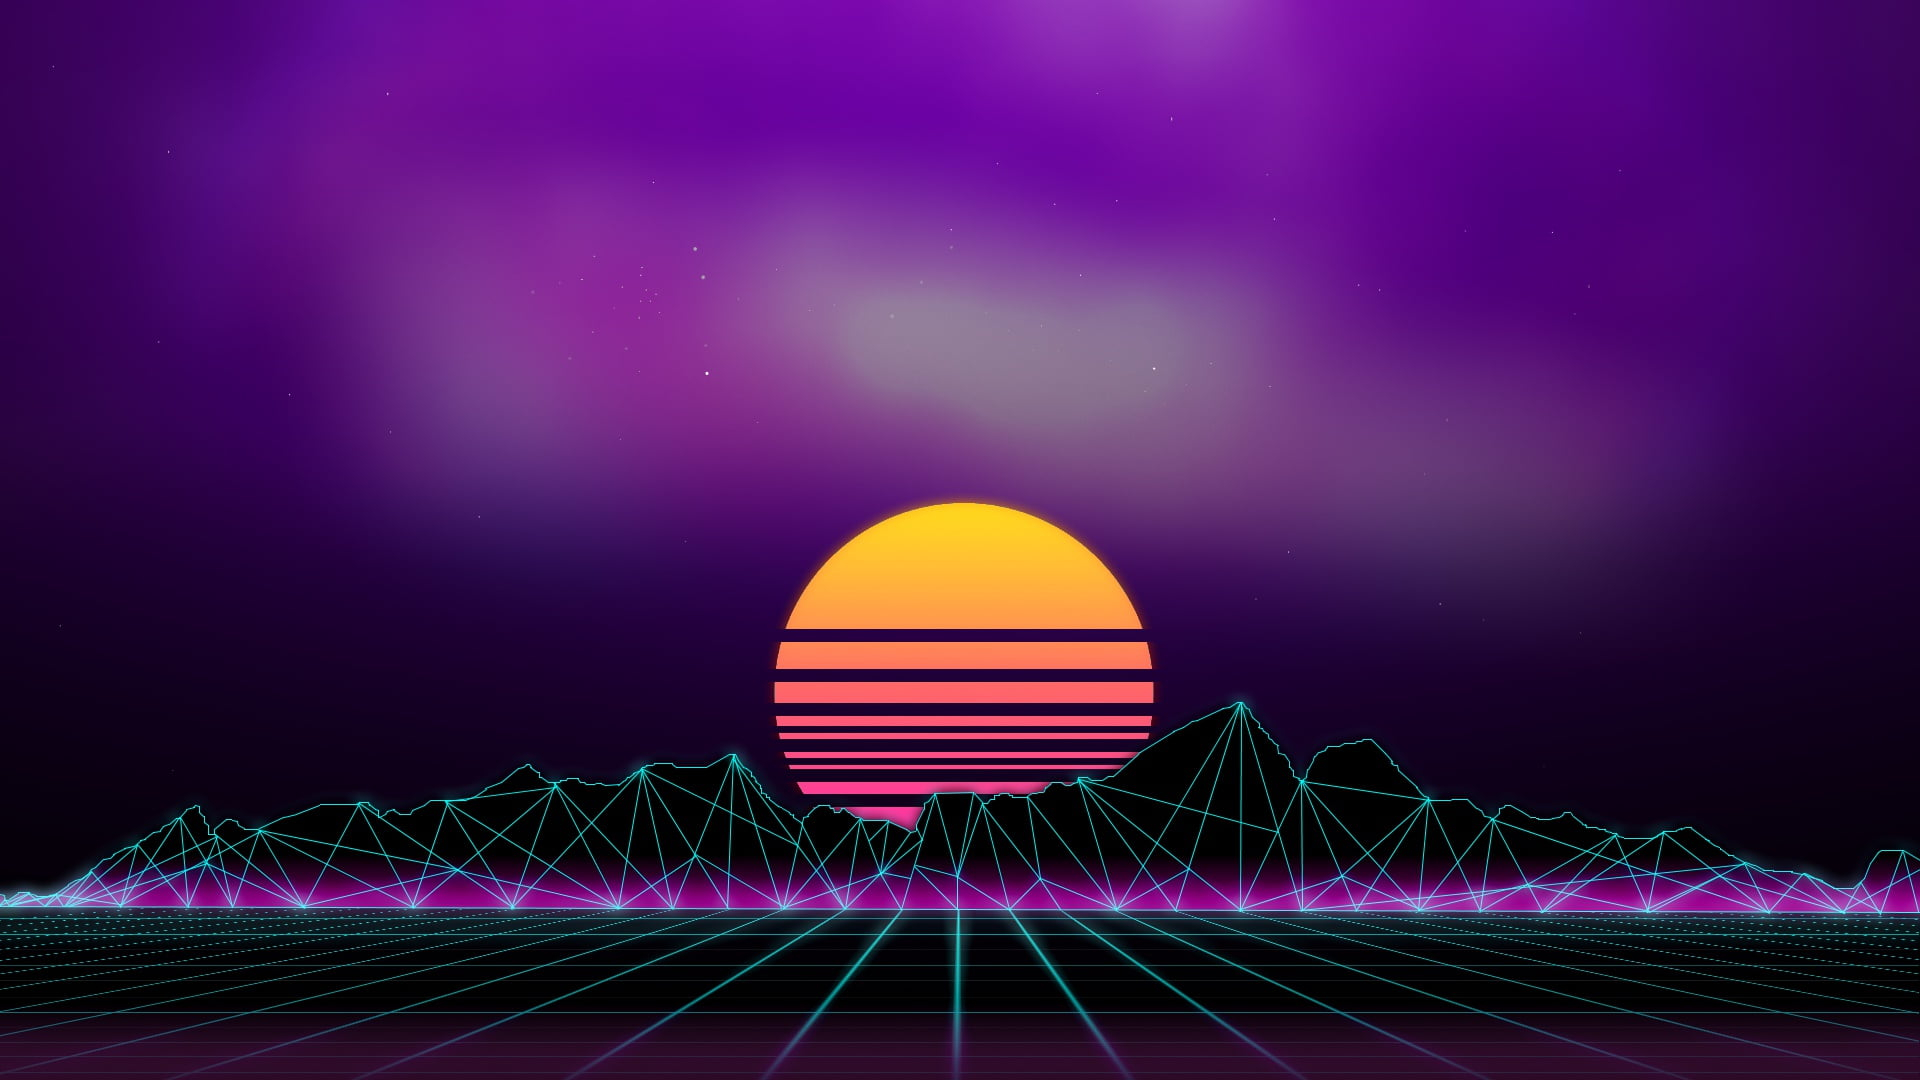 Music, Background, 80s wallpaper, Neon, 80's, Synth, Retrowave, Synthwave